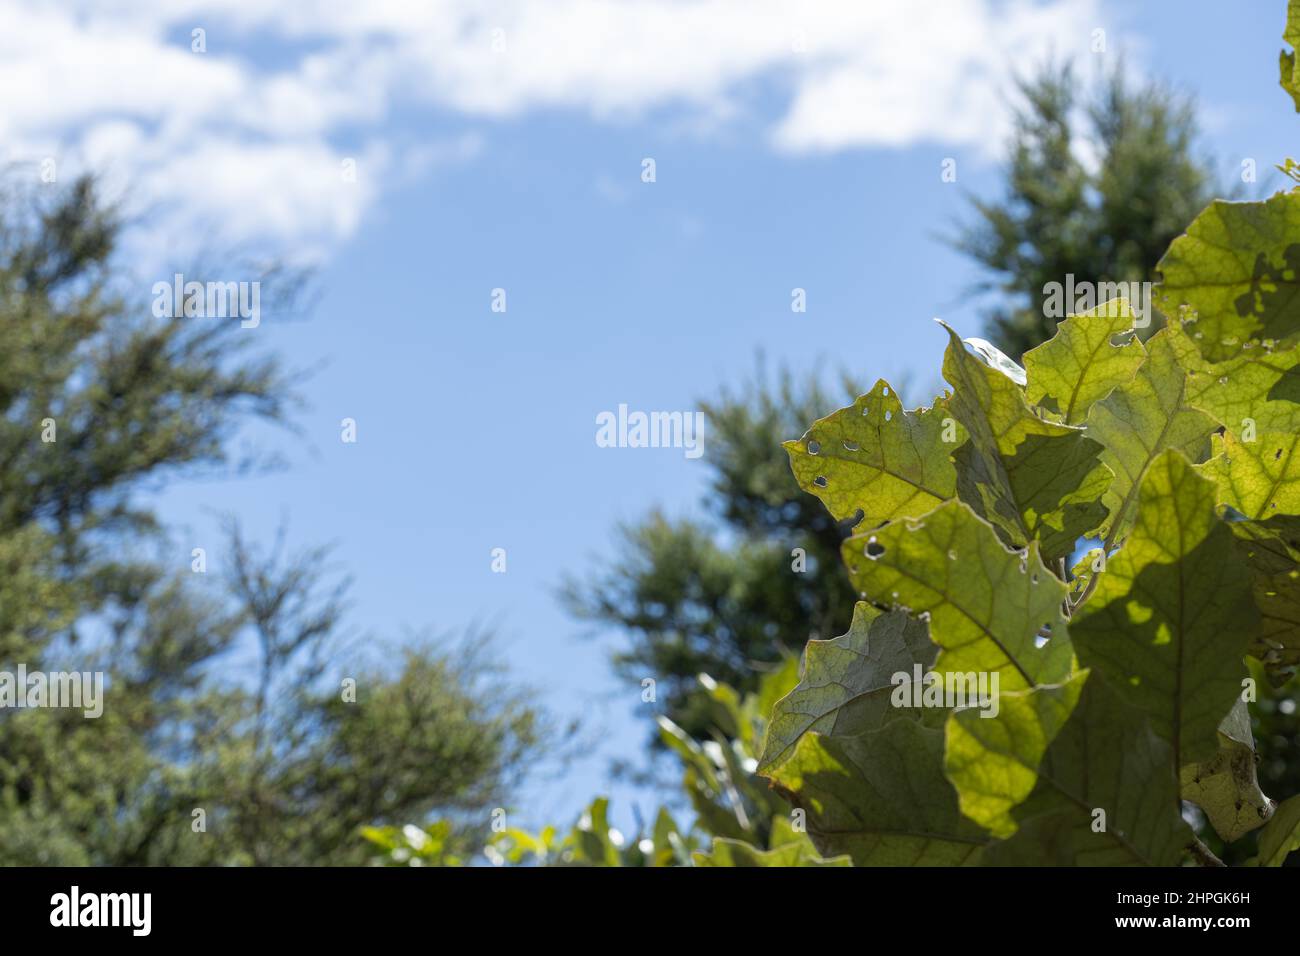 Skyward view with large rangiora leaves Stock Photo